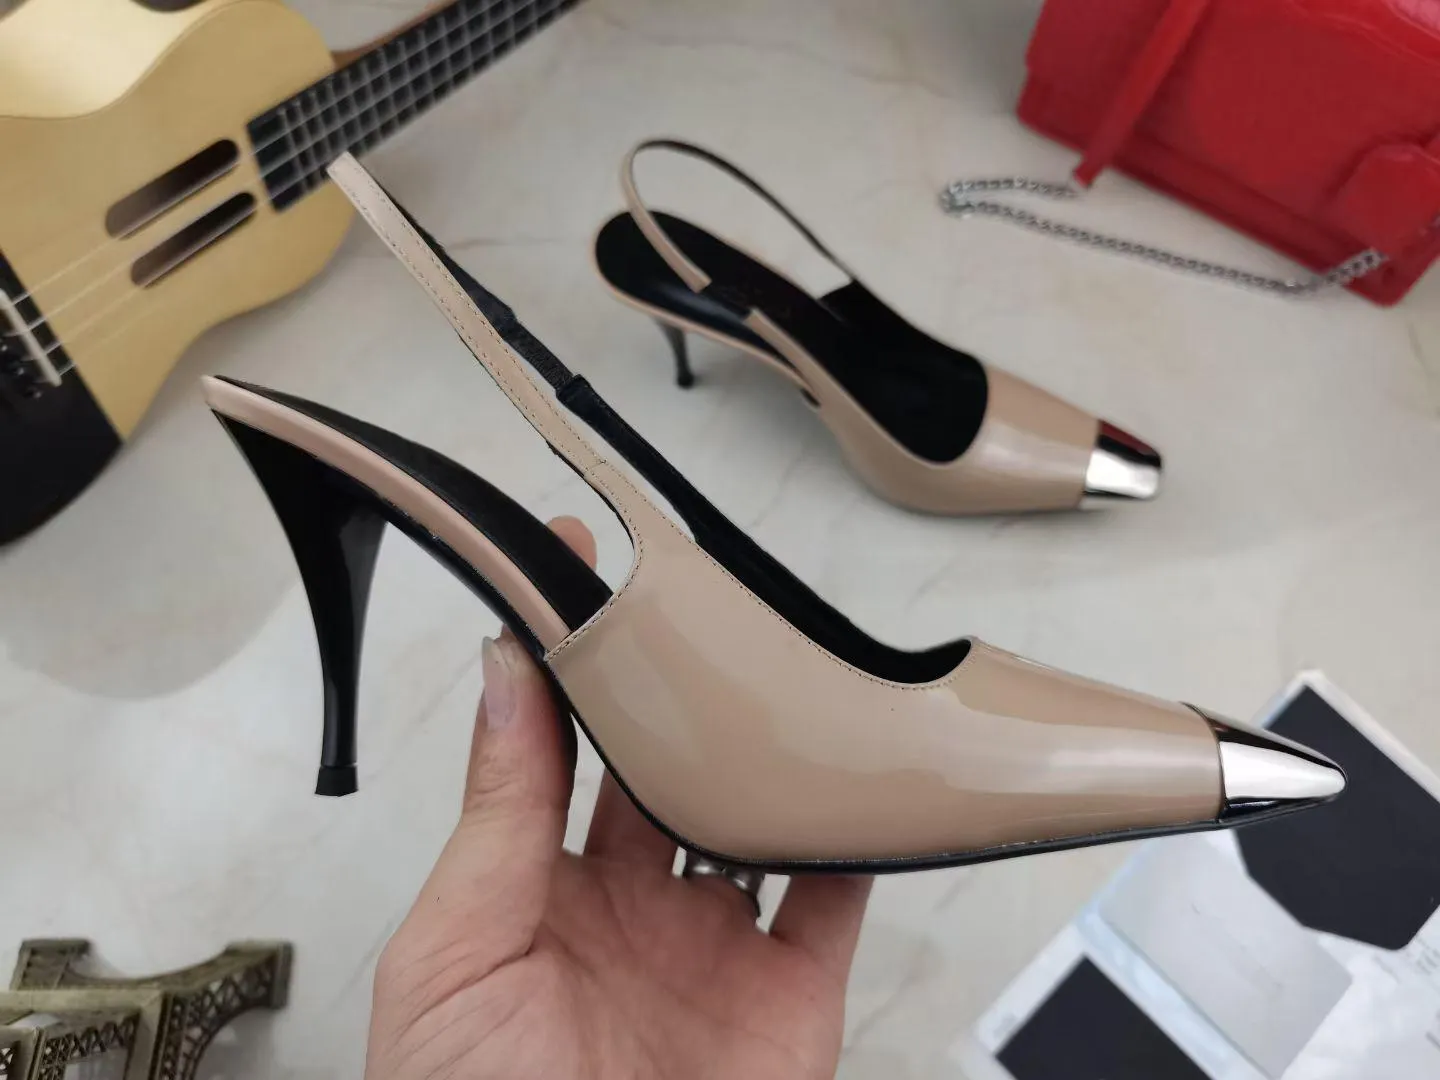 women Sandals party fashion 100% leather Pointed Dance shoe new sexy designer high heels Super Lady wedding Metal Belt buckle Beach Women shoes Large size 35-42 With box